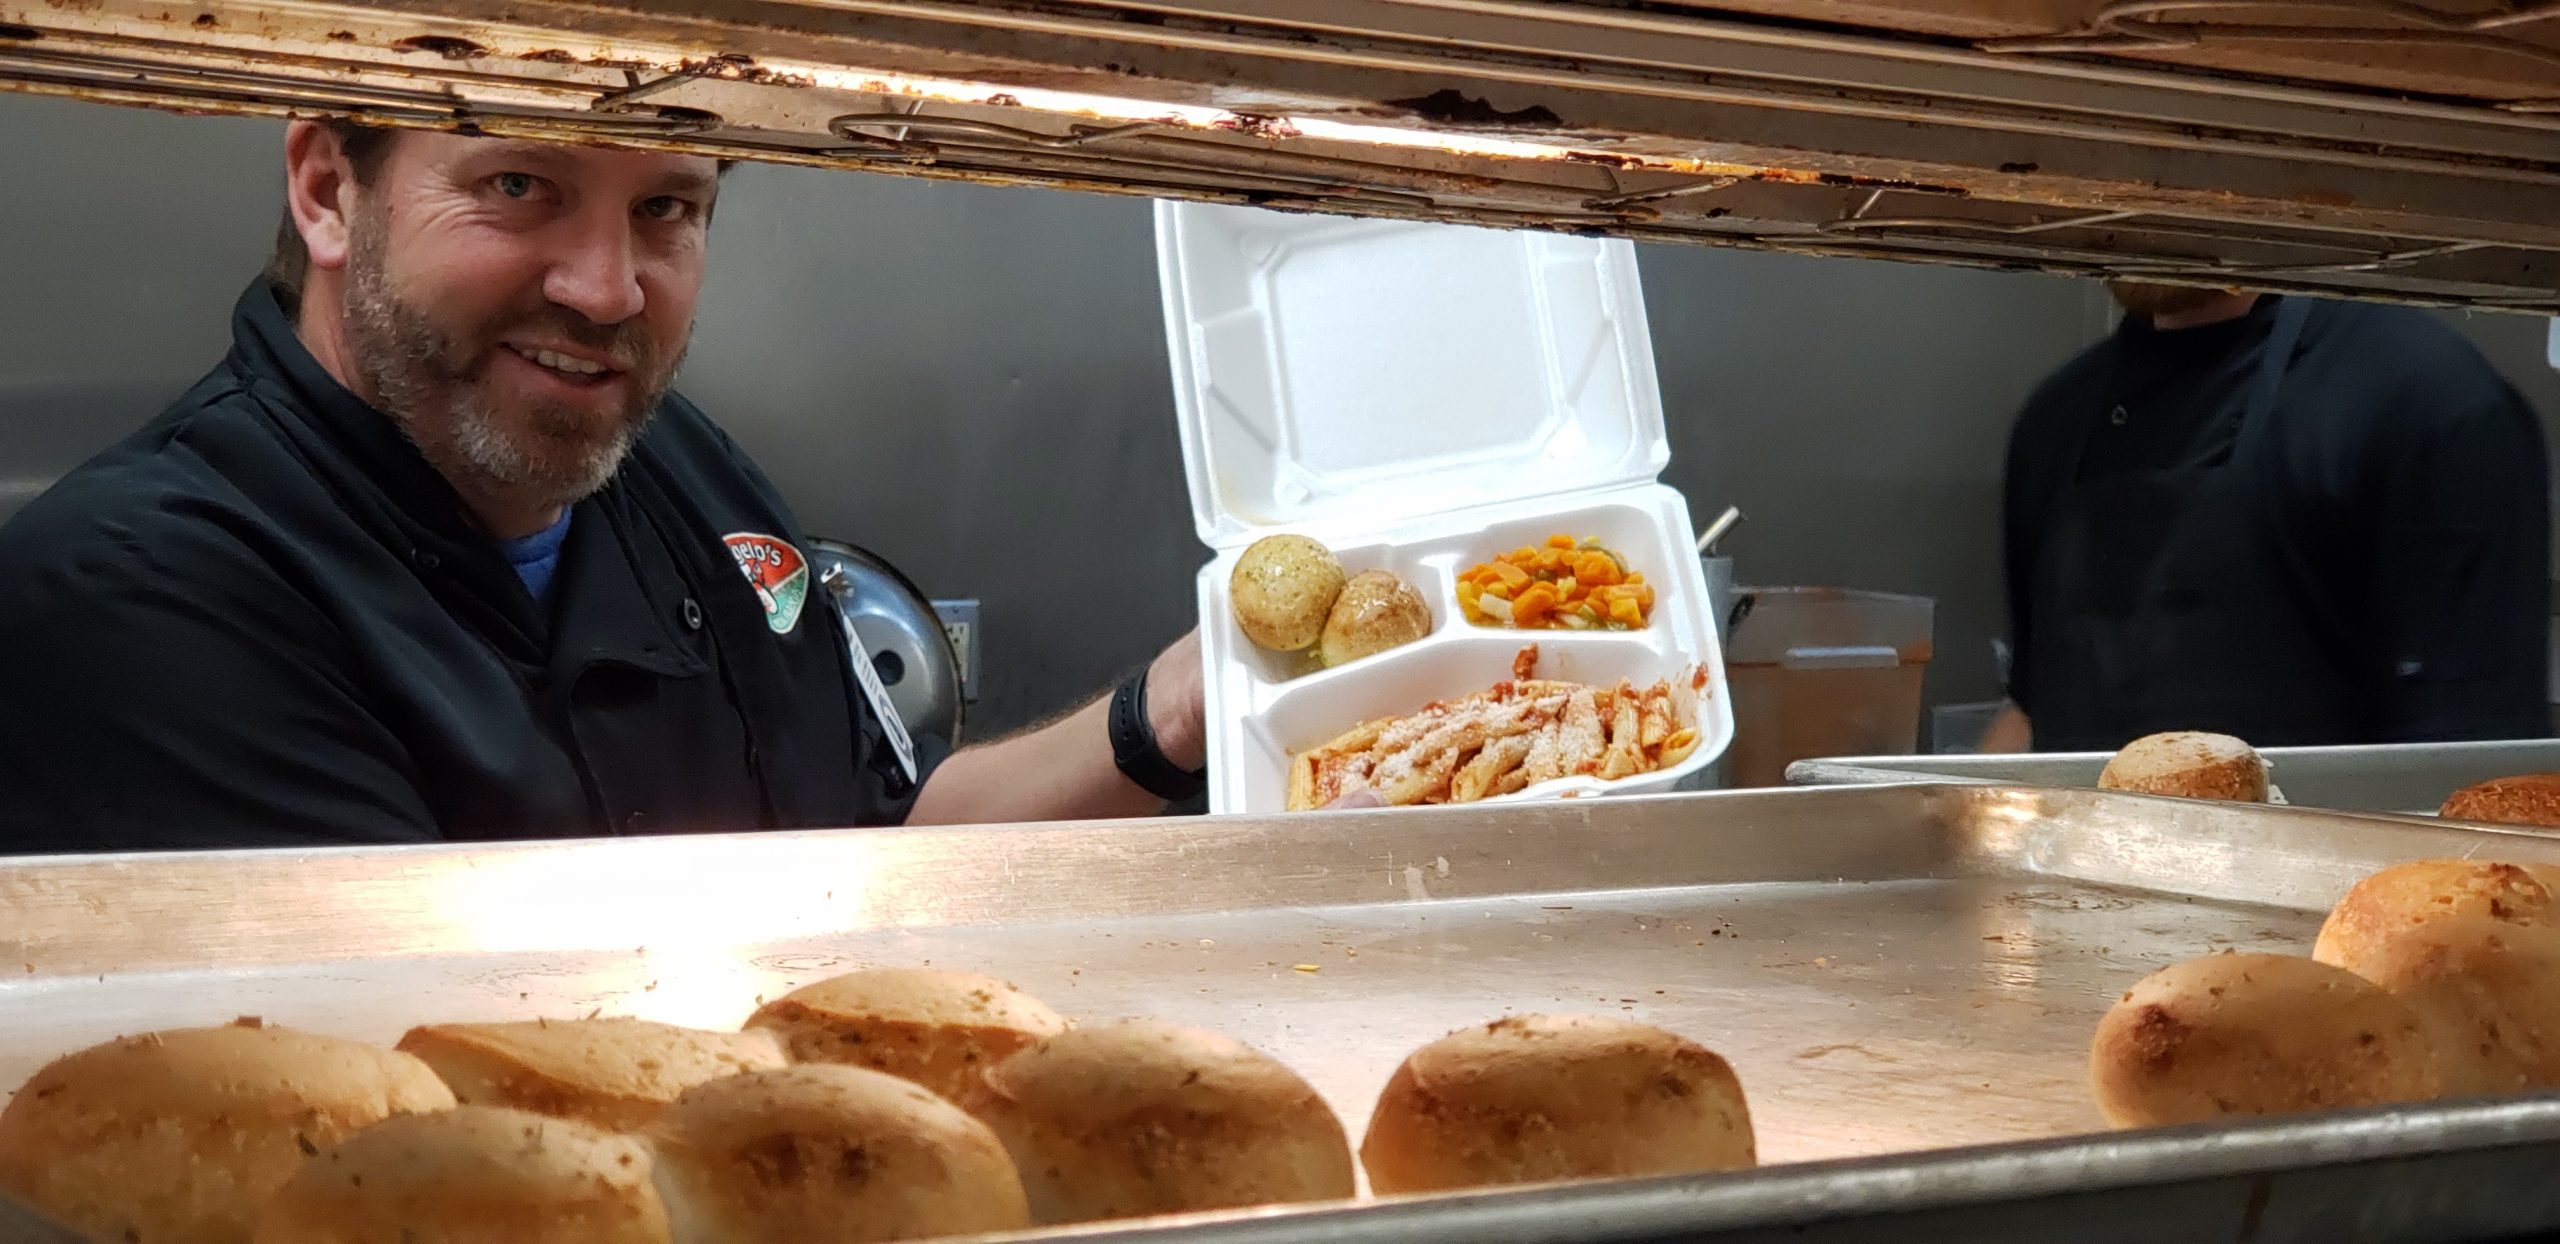 Volunteer making to-go meals with potatoes, mixed vegetables, and pasta